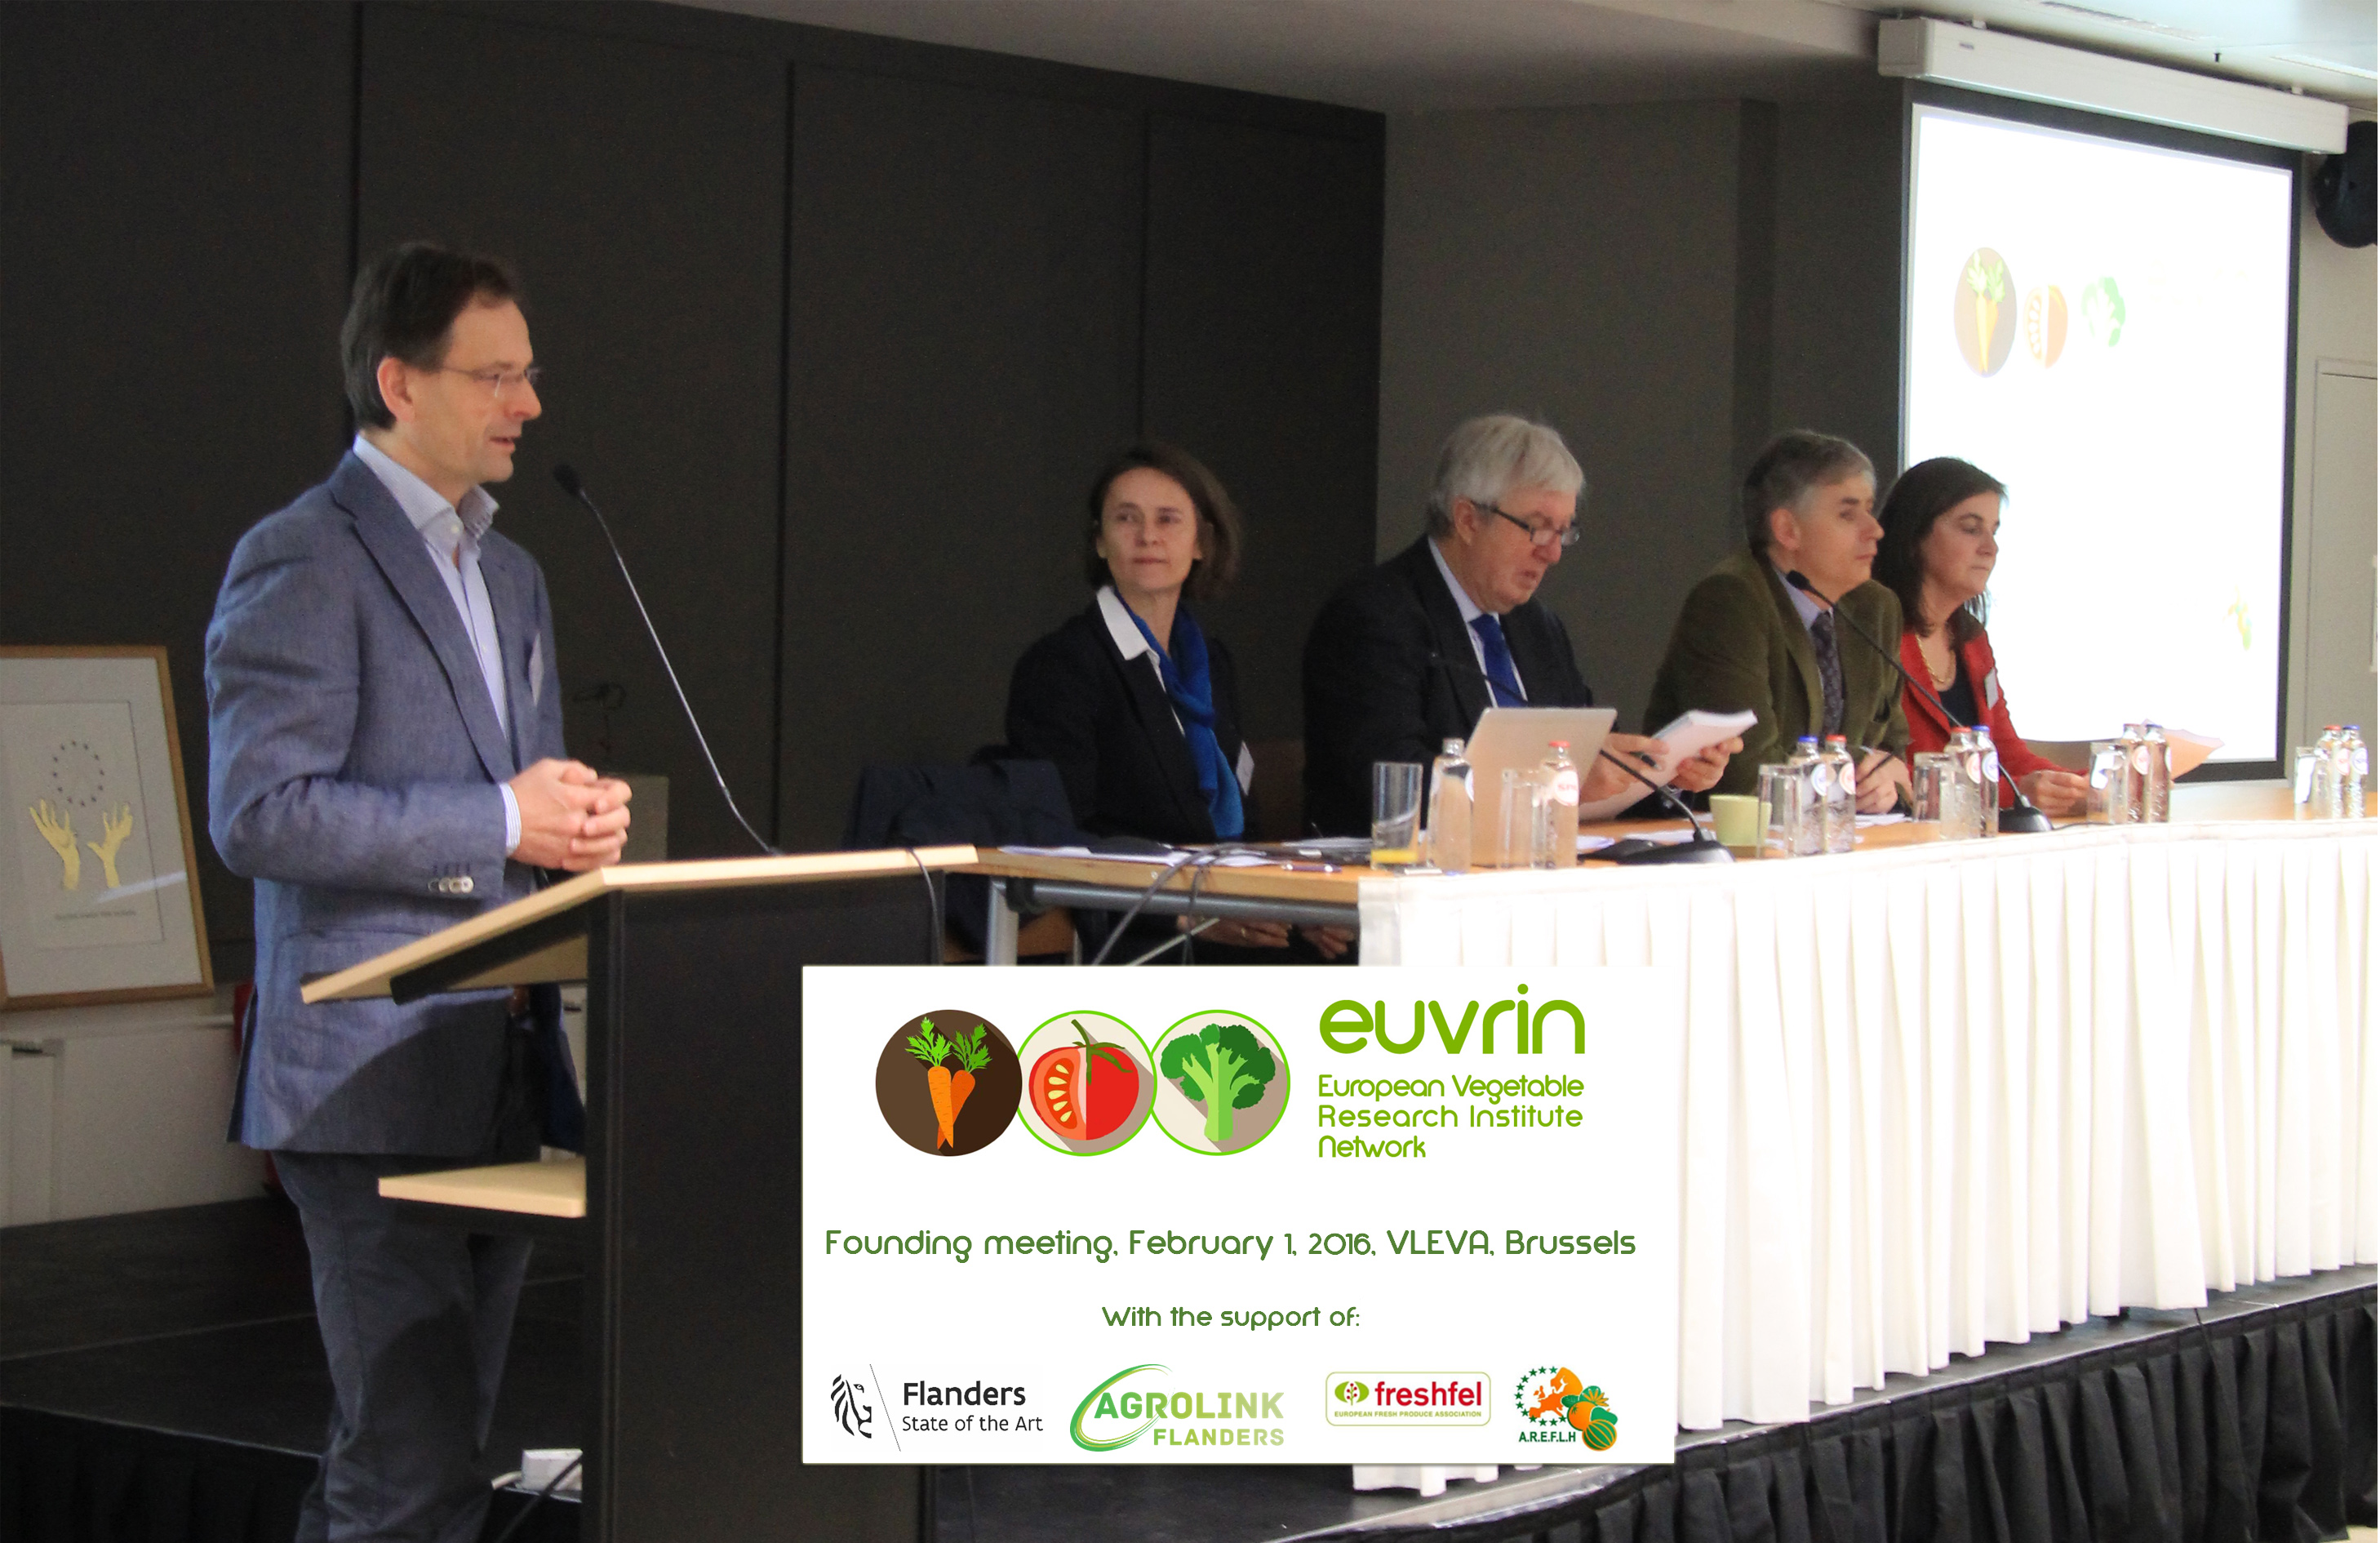 Kick-off of Euvrin, the European Vegetable Institutes Network